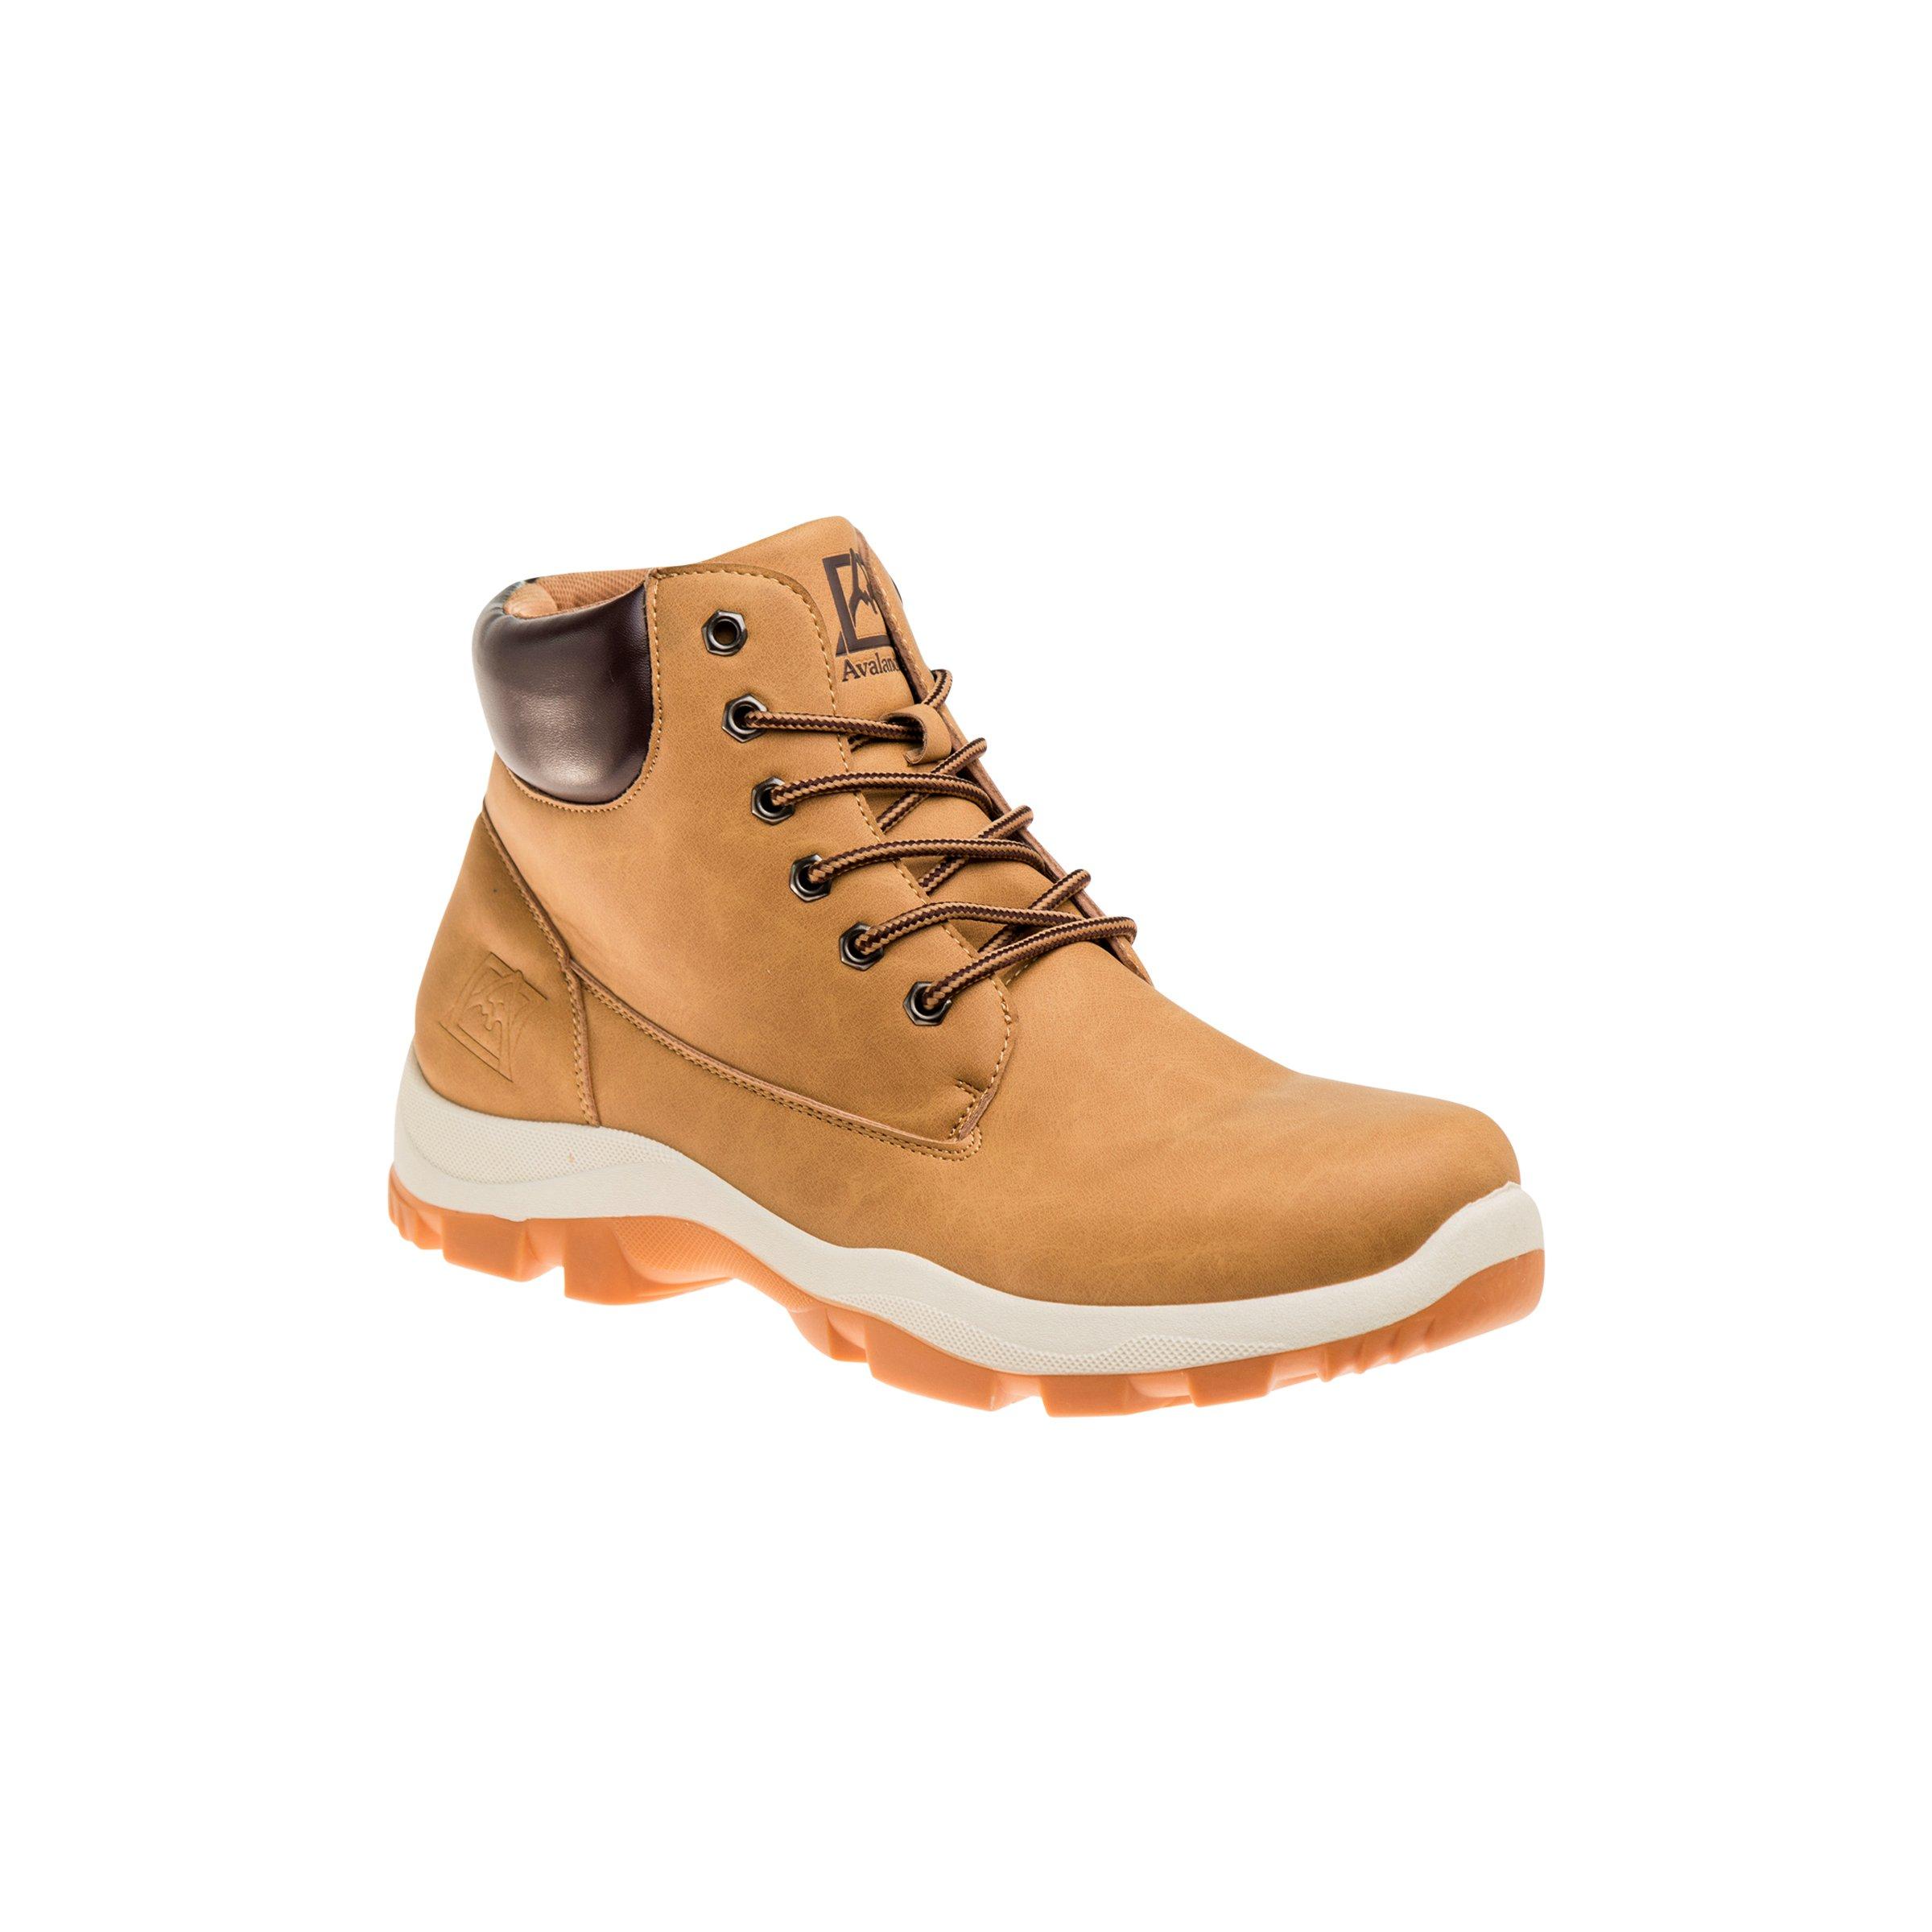 Men's Avalanche Work Boots